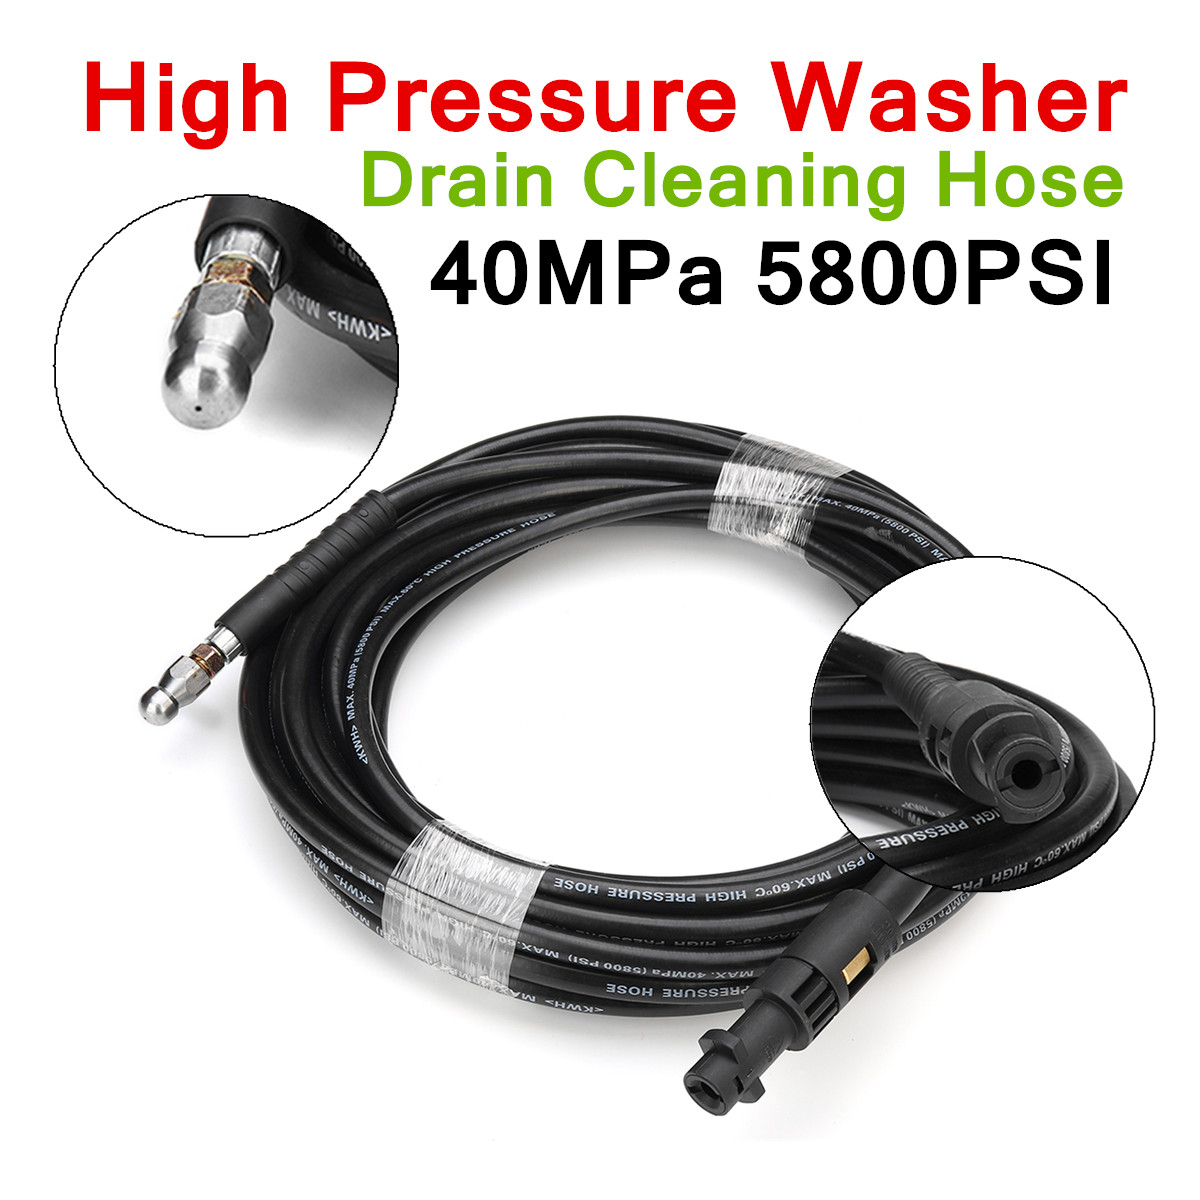 15M-5800PSI-High-Pressure-Washer-Drain-Tube-Cleaning-Hose-Kit-Pipe-Cleaner-Unblocker-1396553-2